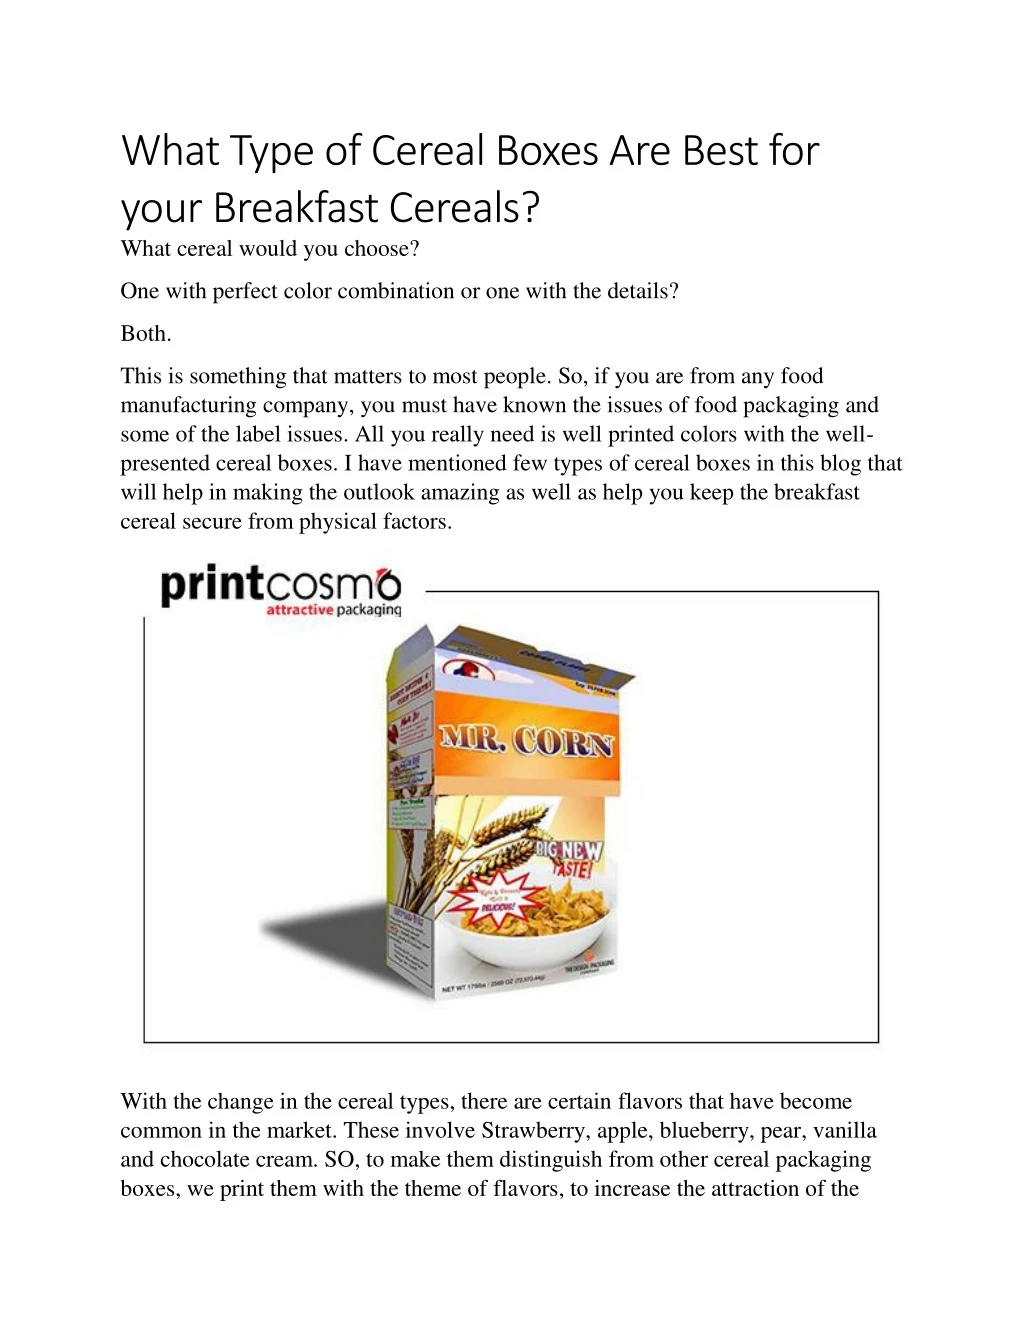 what type of cereal boxes are best for your